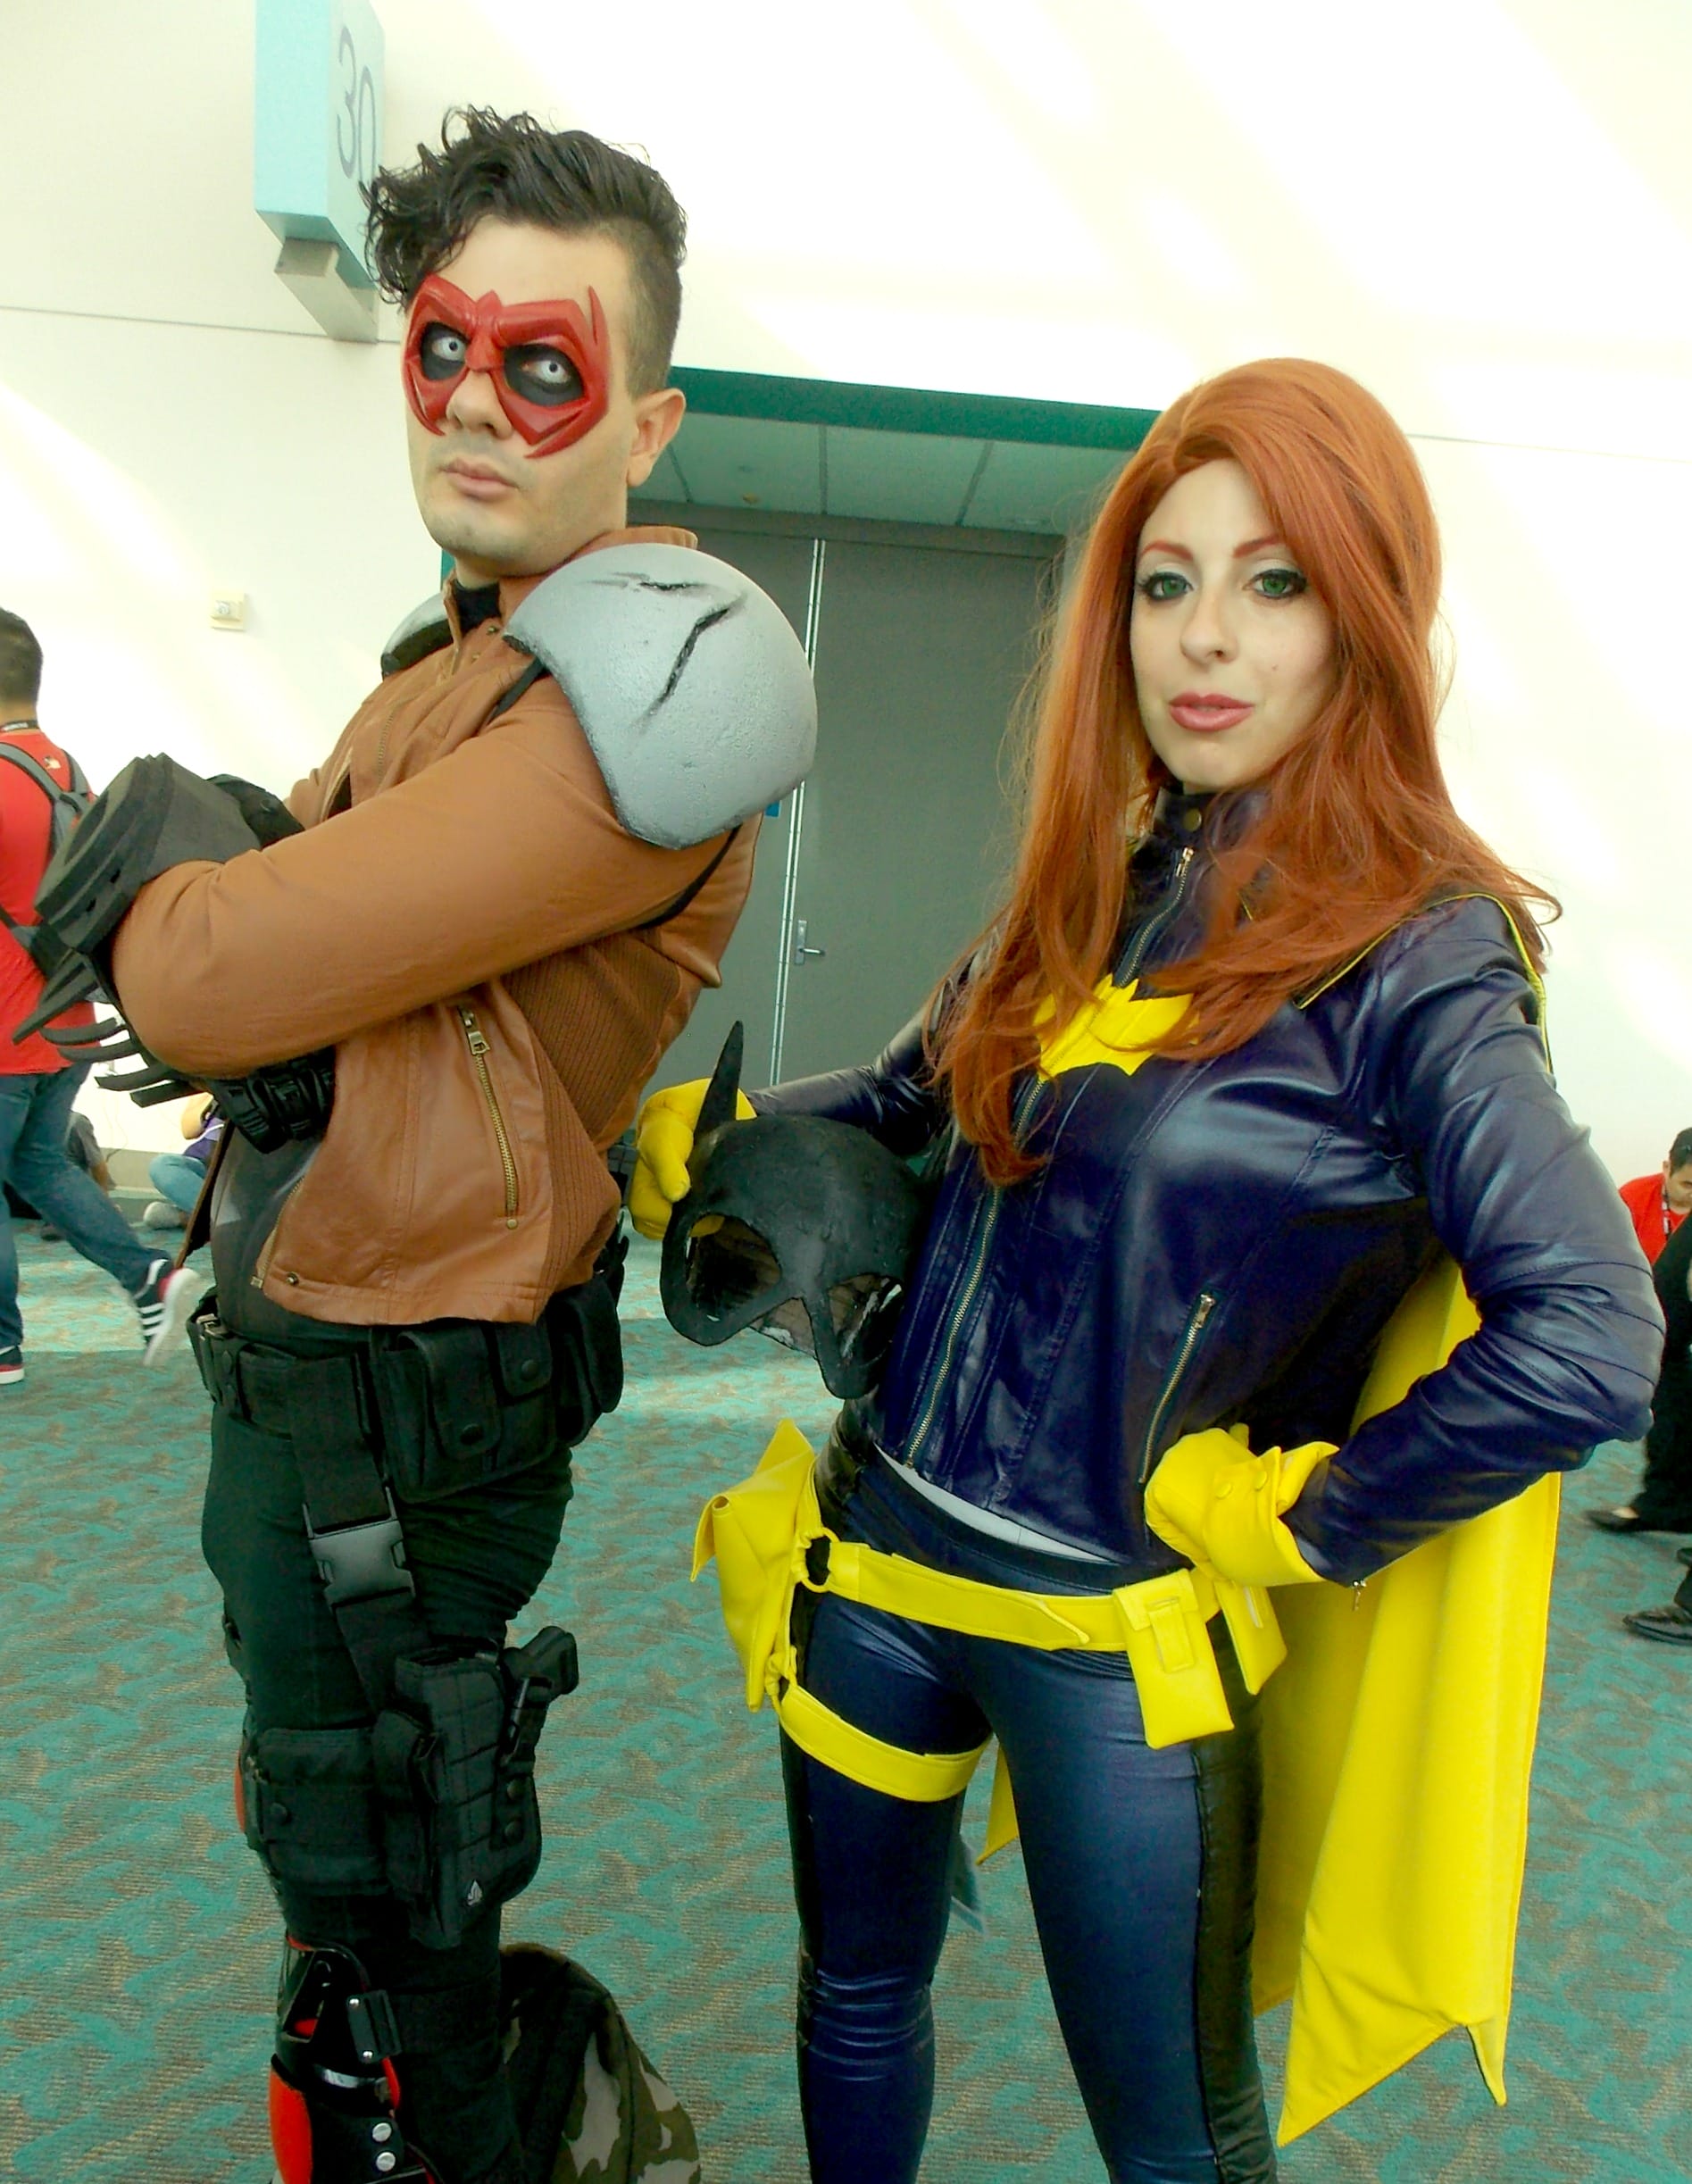 Delightful couples costumes spotted at the 2016 San Diego Comic Con